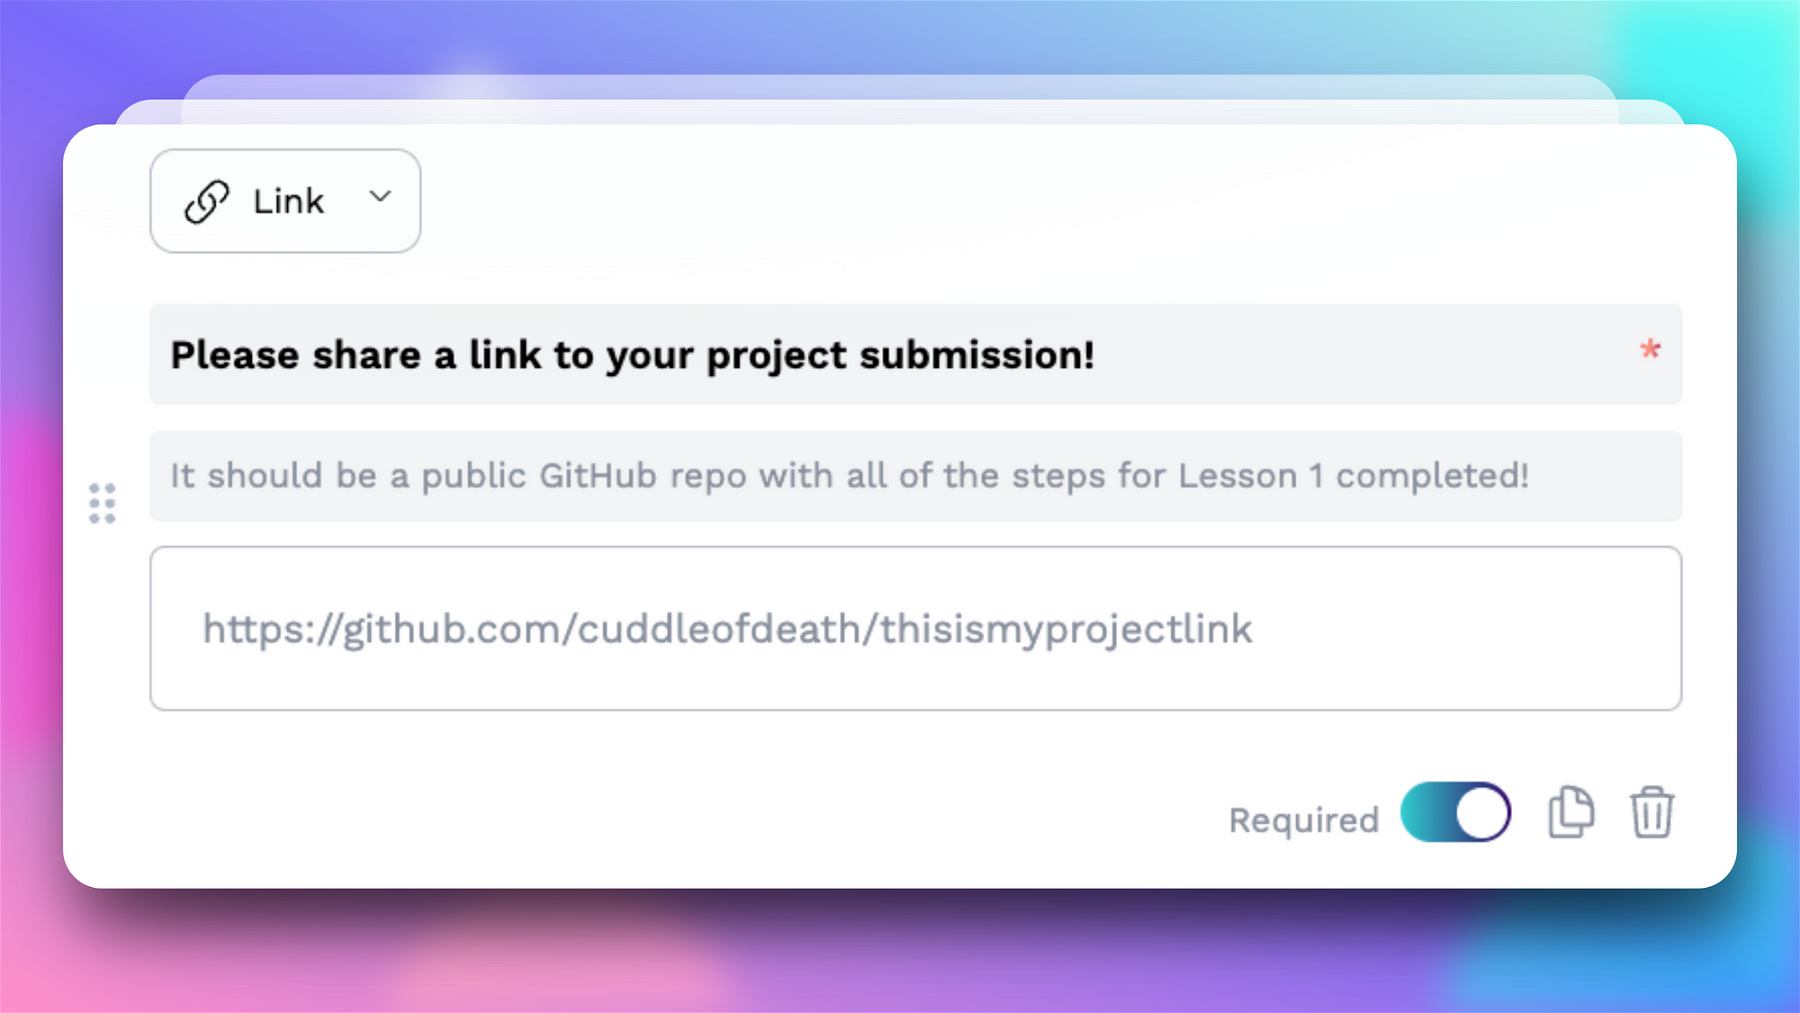 Example of a link question implemented on a form. This question asks responders to share link to their project submission (such as a GitHub link)